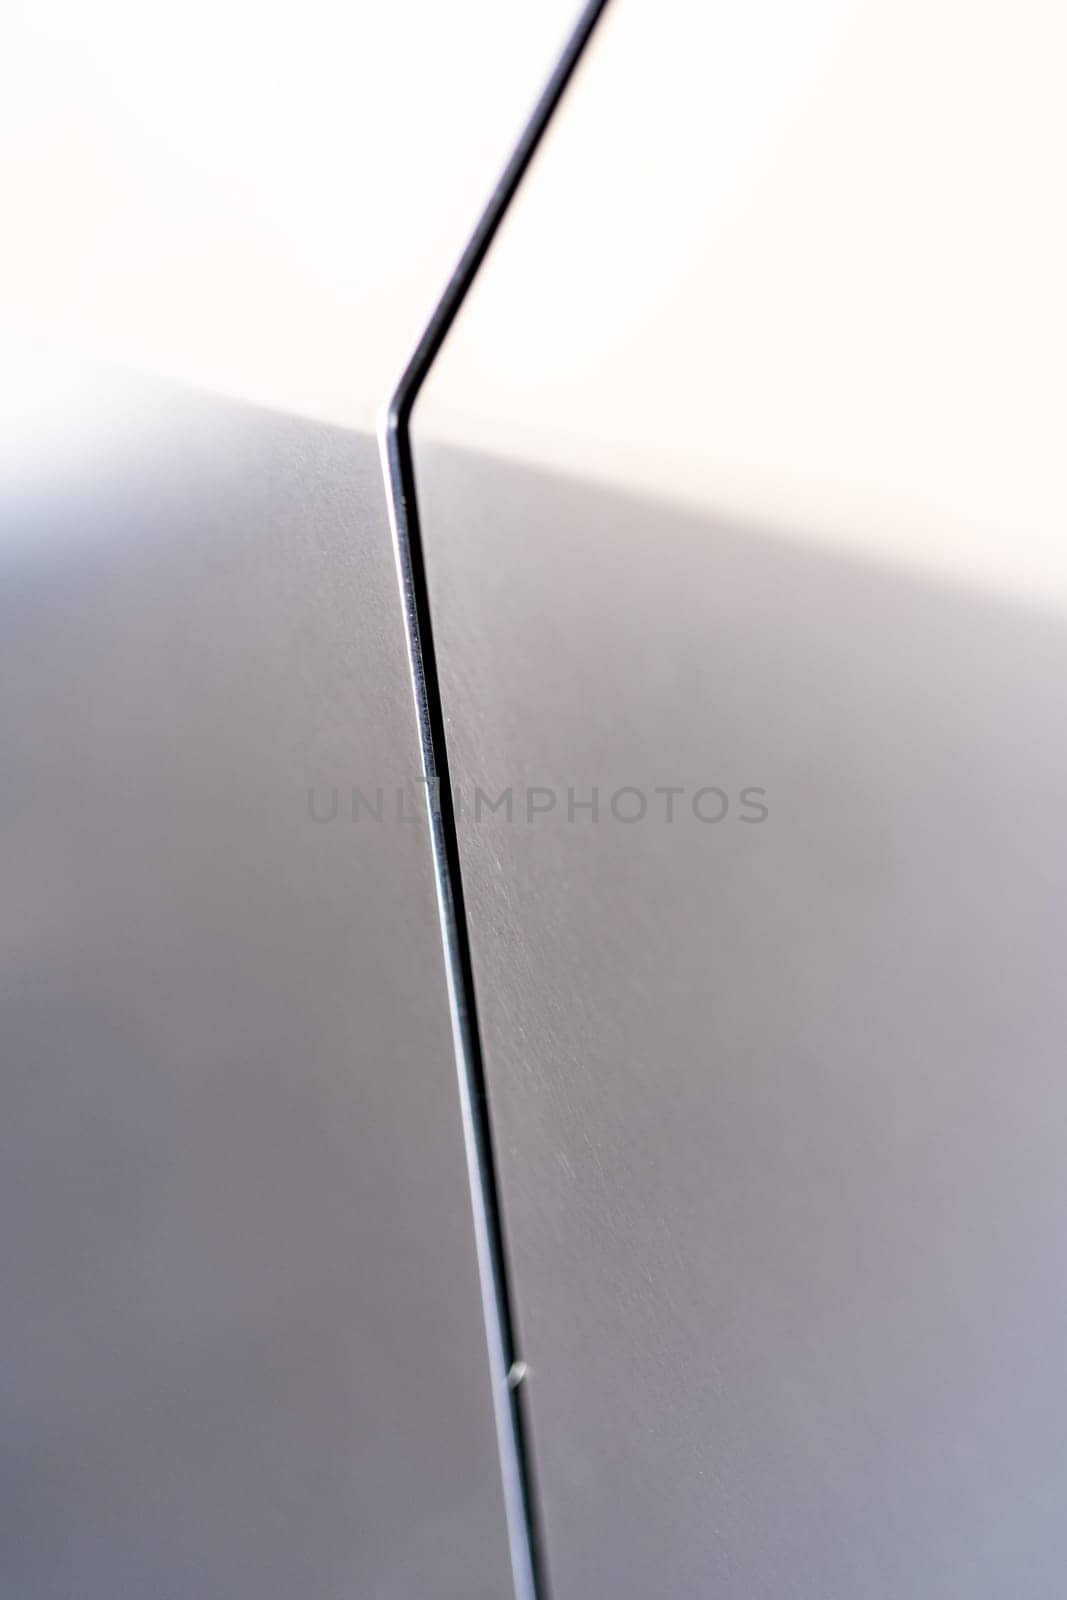 Denver, Colorado, USA-May 5, 2024-A close-up image capturing the precise panel seam of the Tesla Cybertruck, highlighting the minimalist design and sharp contours that characterize the exterior of this innovative electric vehicle.